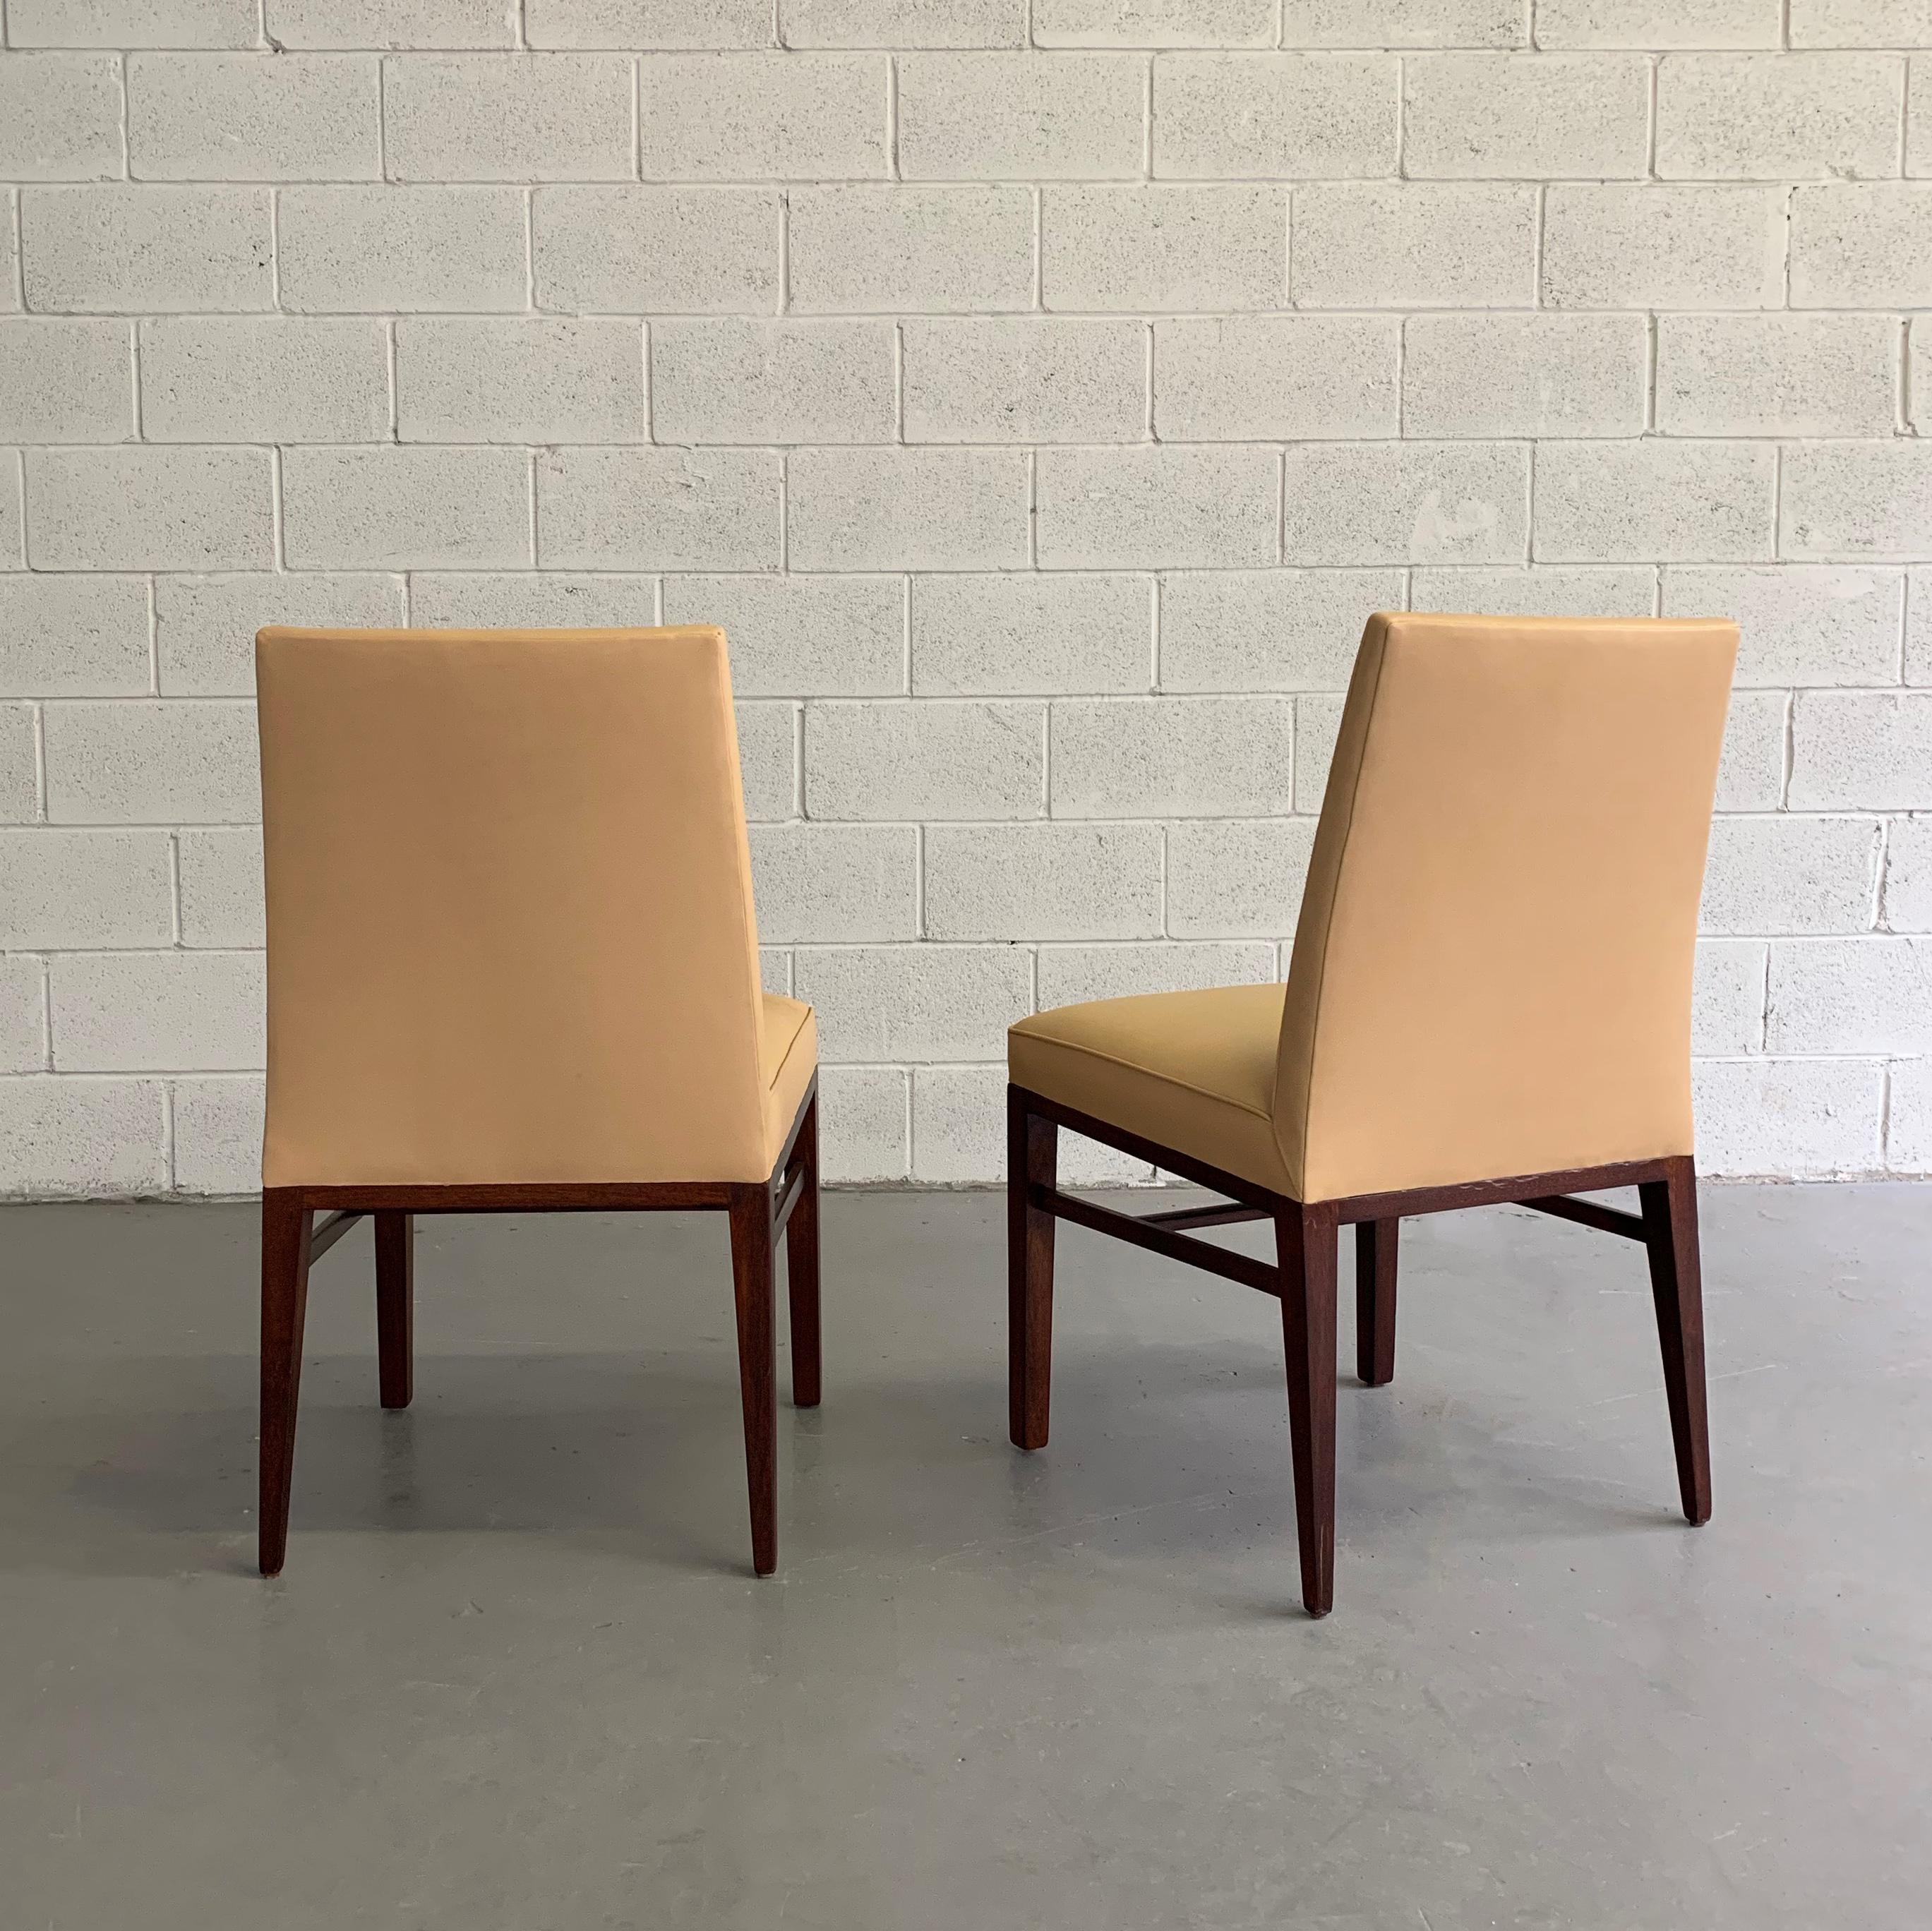 American Pair of Edward Wormley for Dunbar Leather Slipper Side Chairs For Sale